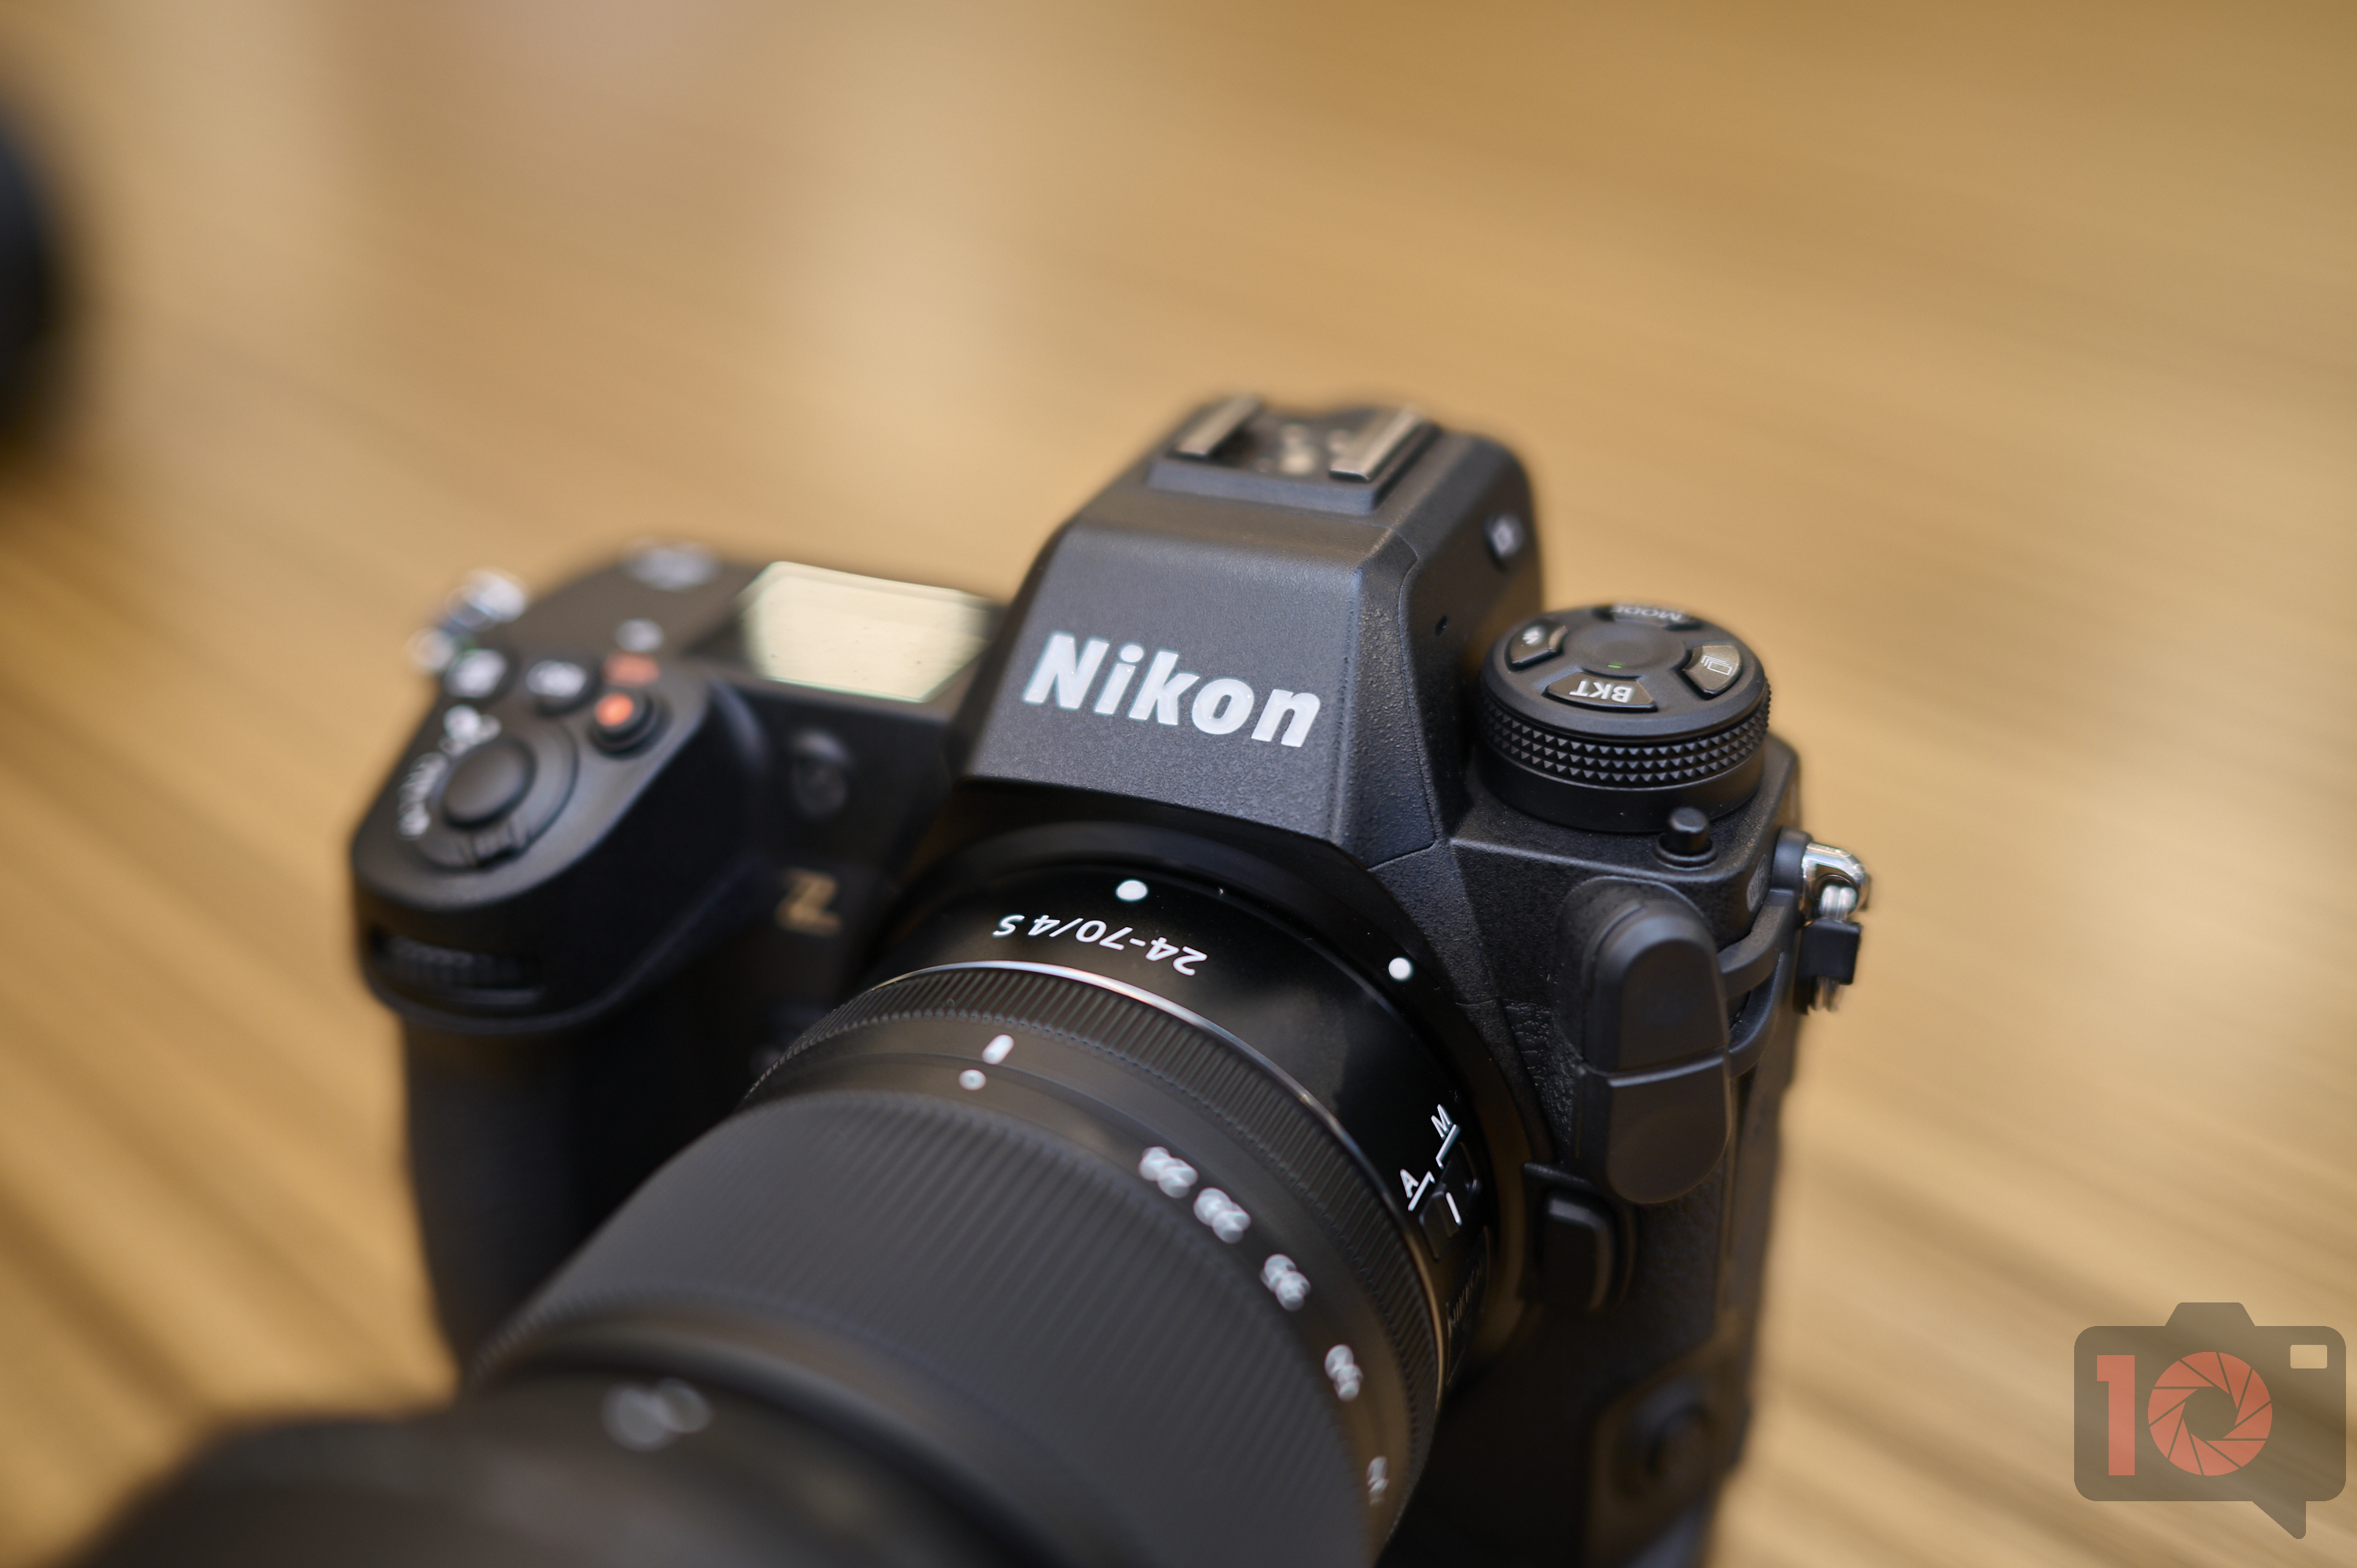 Chris Gampat The Phoblographer Nikon z9 product images first impressions13